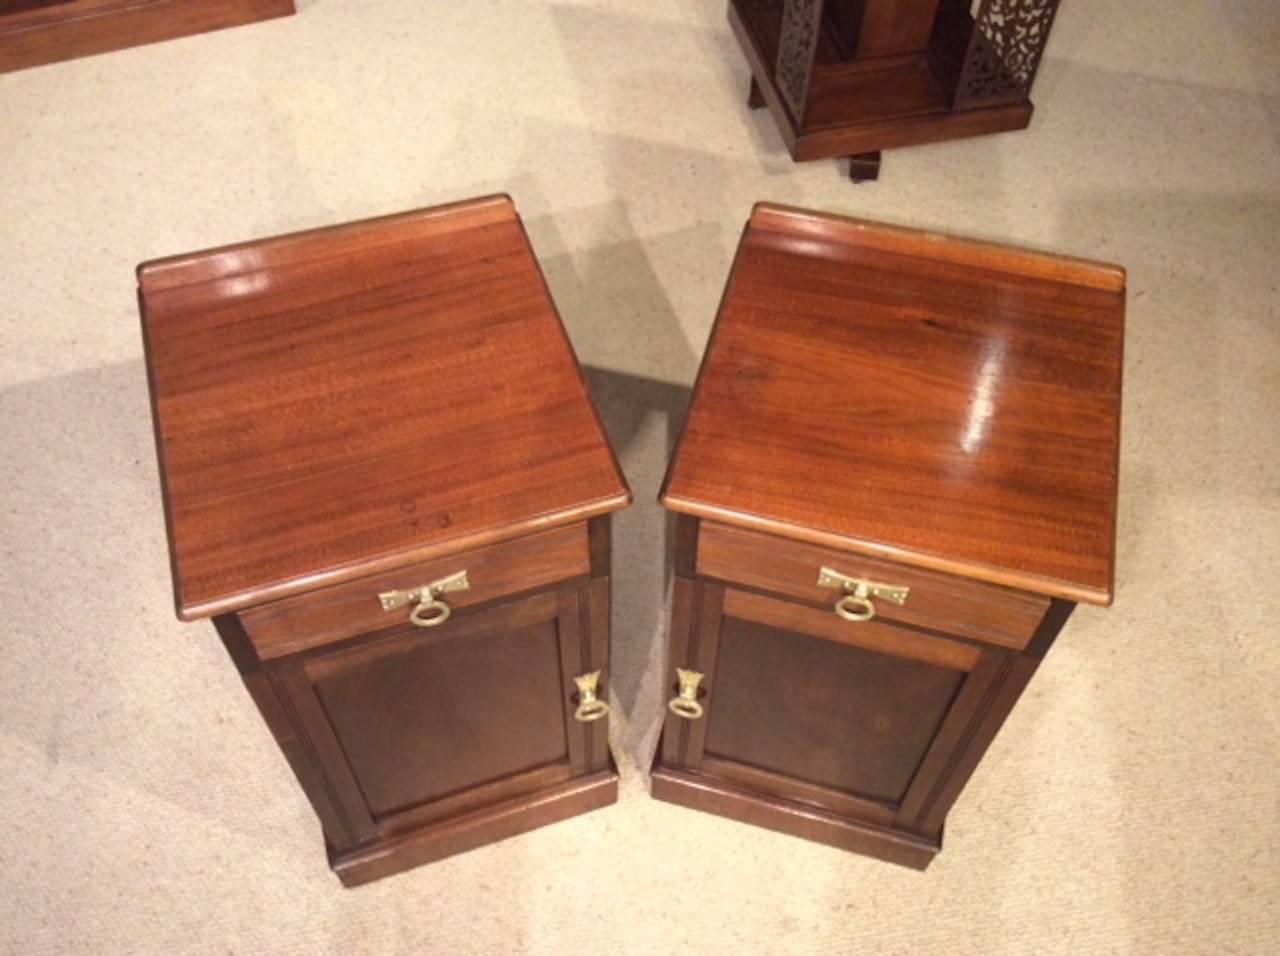 Late 19th Century Good Pair of Walnut Victorian Period Antique Bedside Cabinets